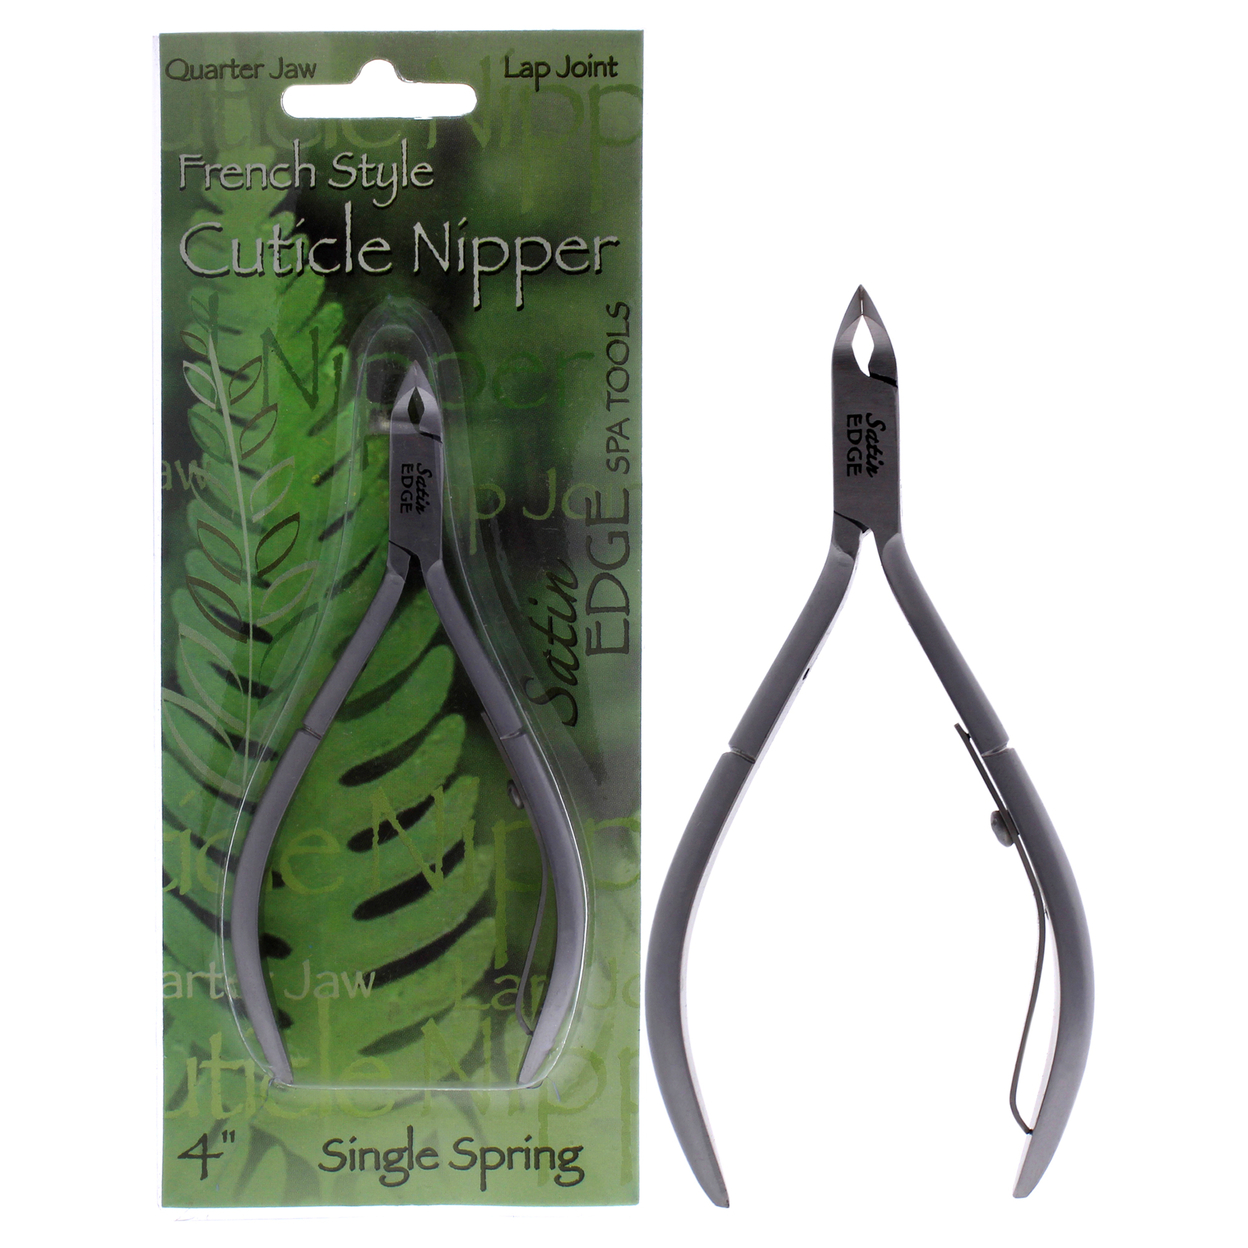 Satin Edge Cuticle Nipper French Style - Quarter Jaw 4 Inch